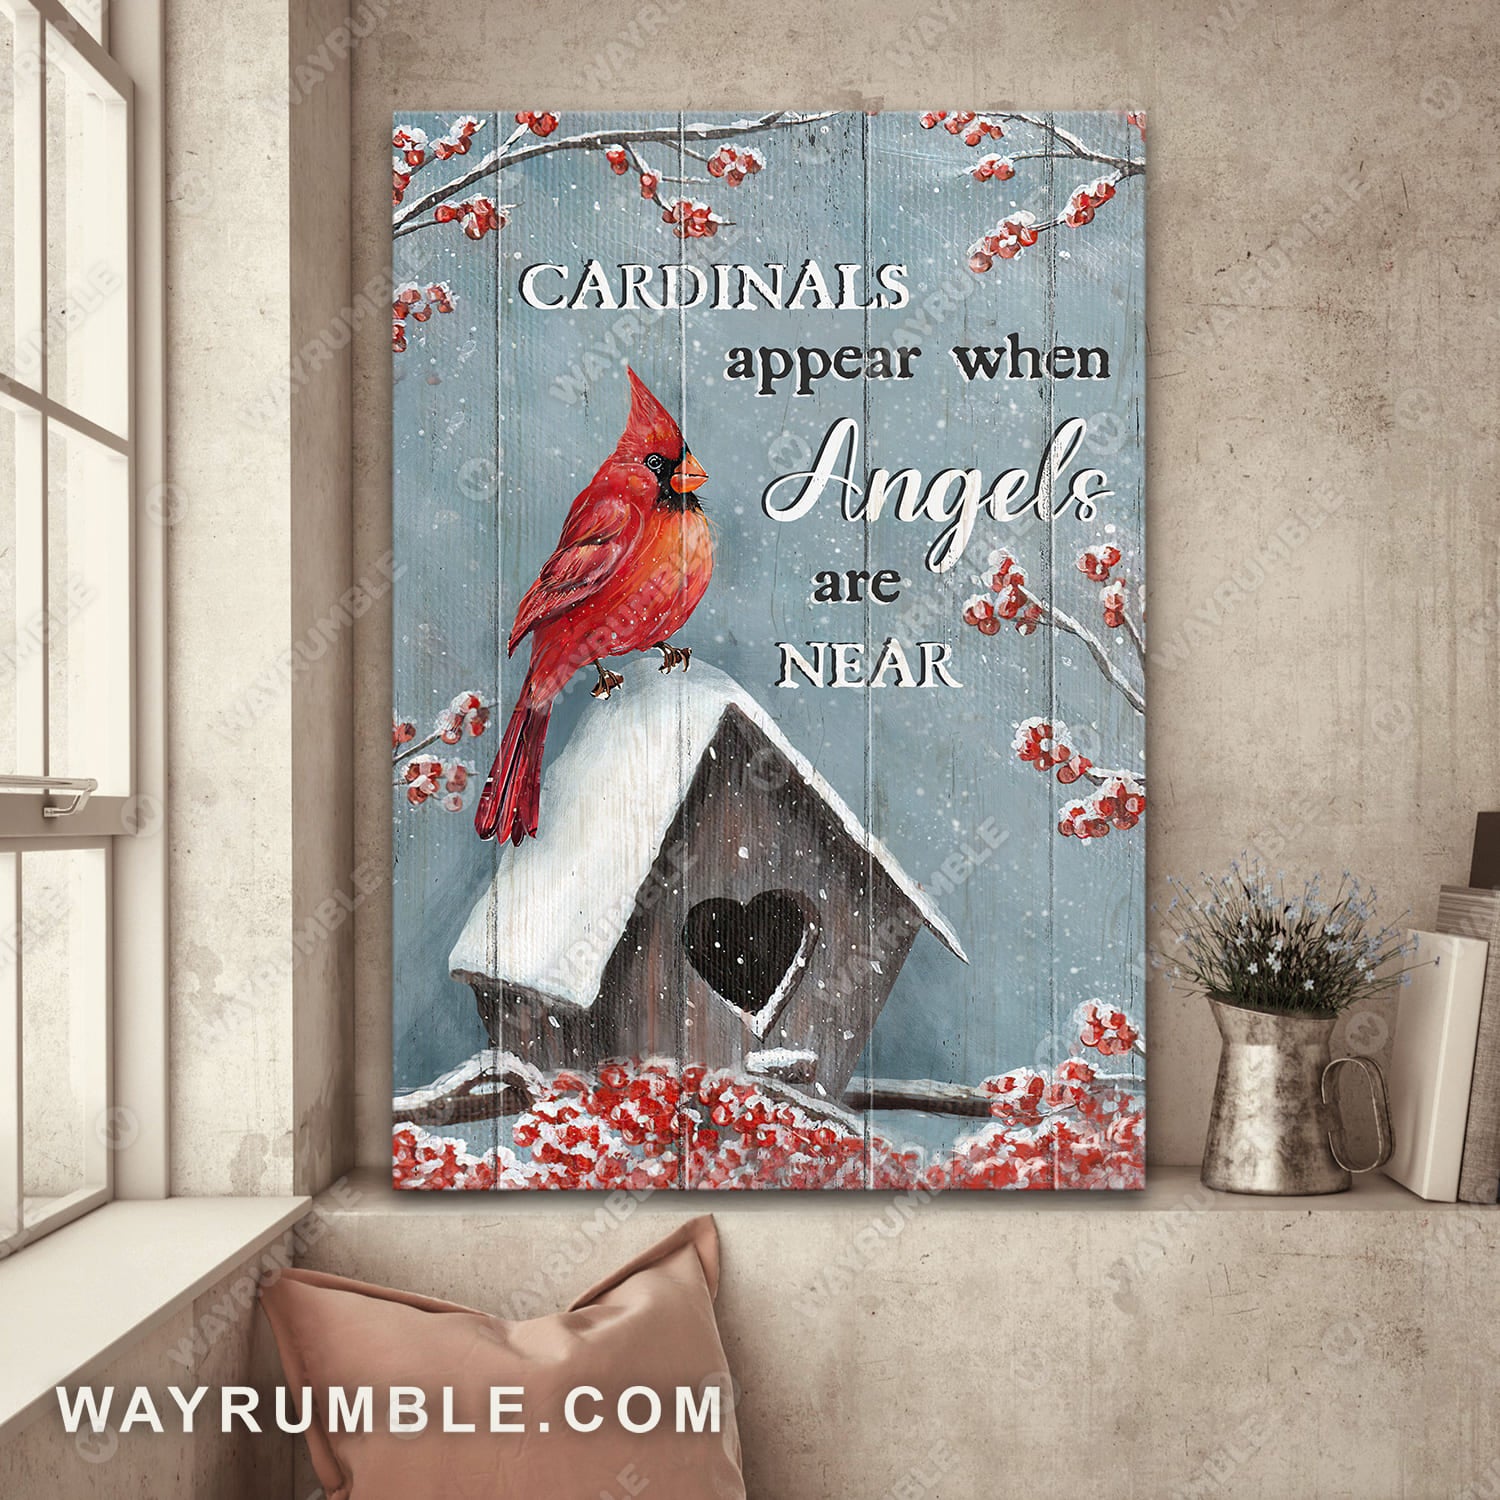 Wooden birdhouse, Red cardinal, Cardinals appear when angels are near - Heaven Portrait Canvas Prints, Wall Art